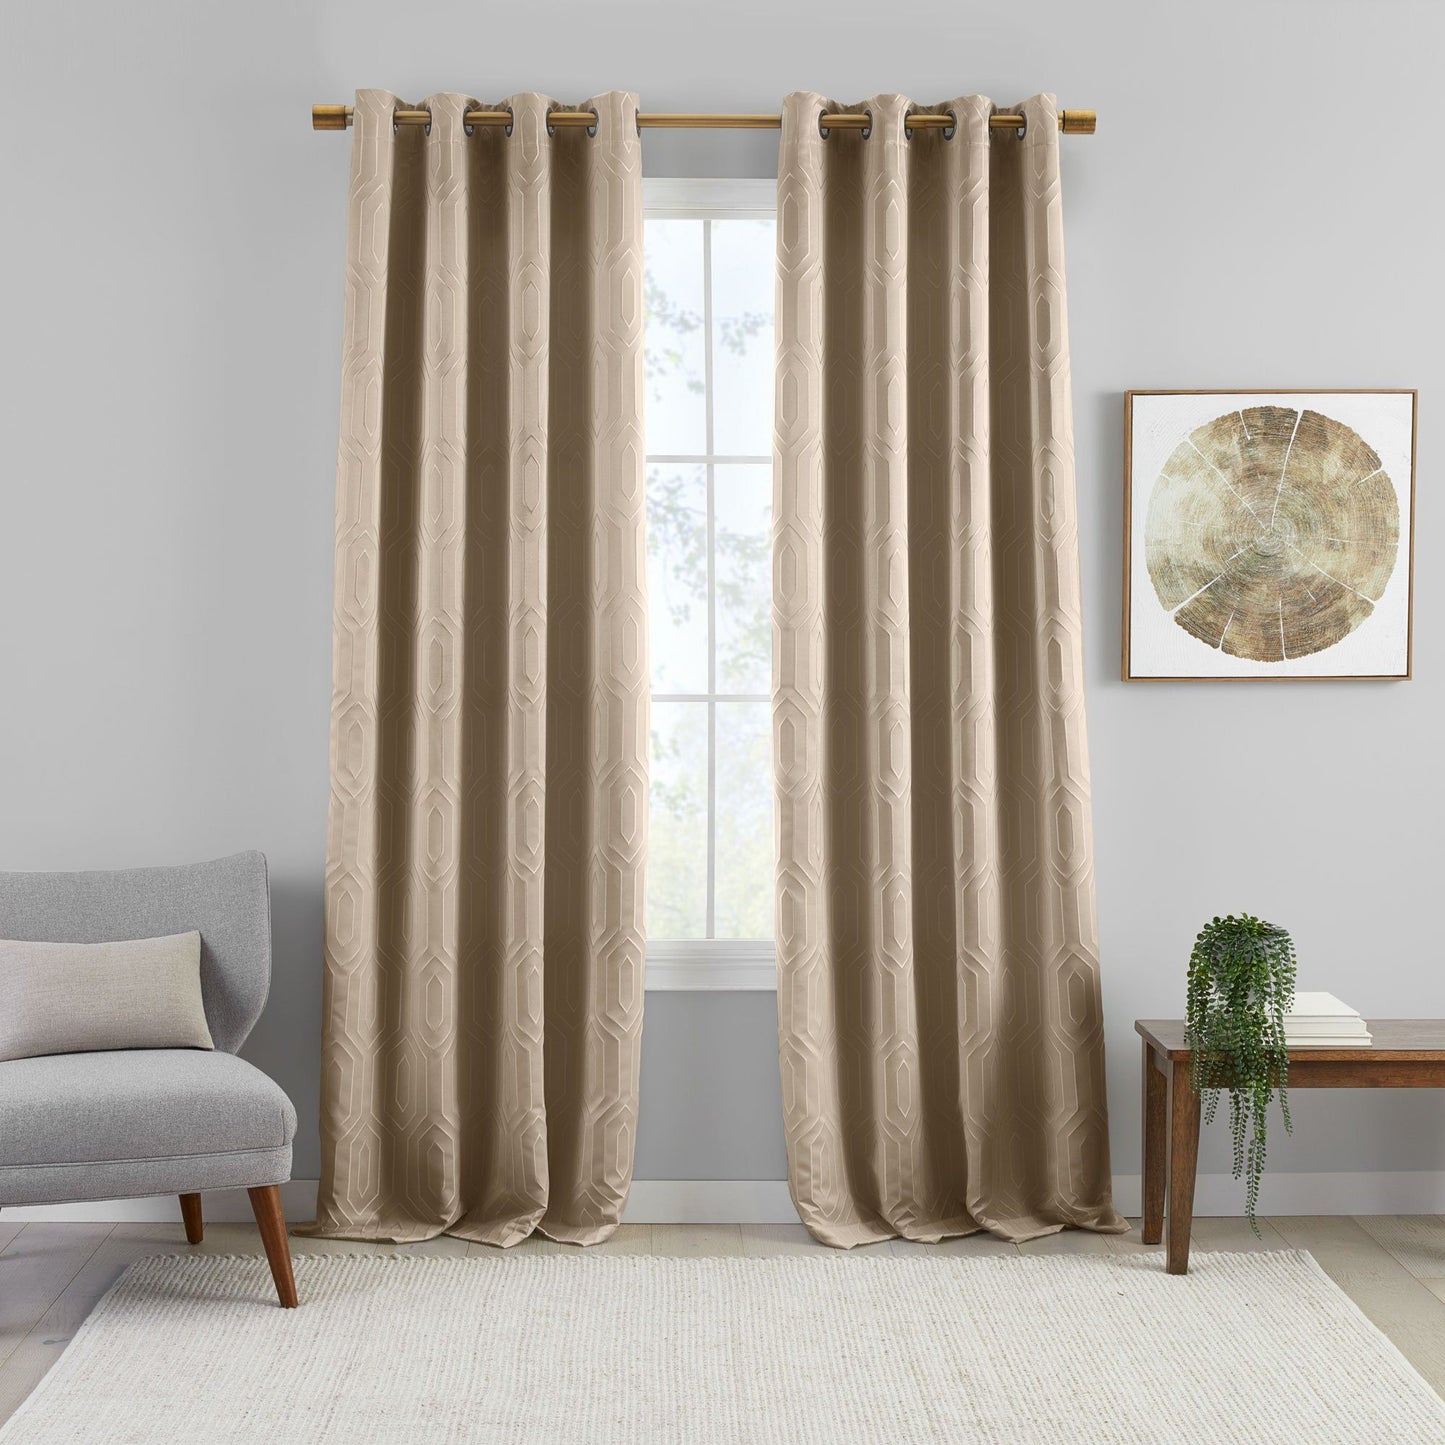 Huxley Geometric Blackout Embroidered Textured Window Curtain Panel-Elrene Home Fashions